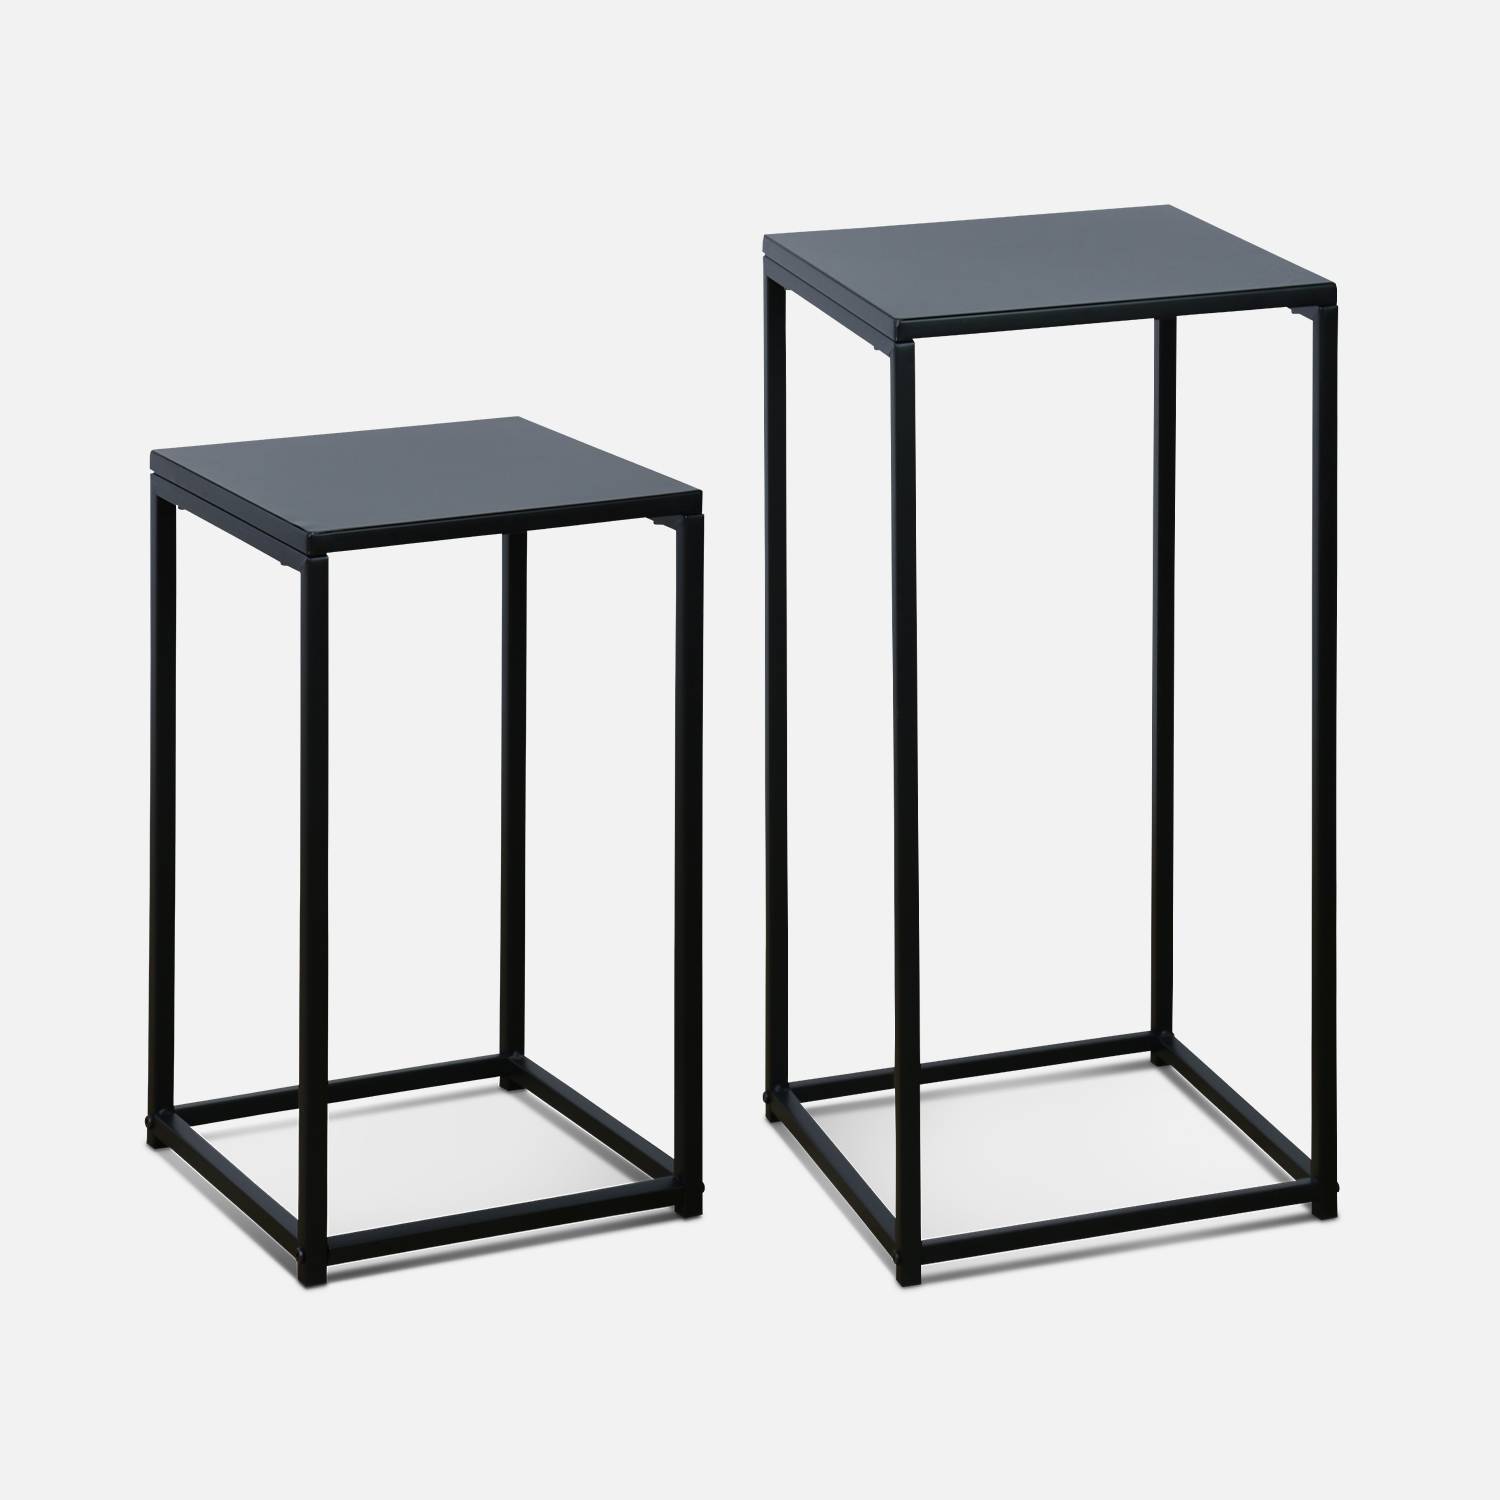 Set of 2 side tables/ end of sofa , Industrielle, Black Photo3